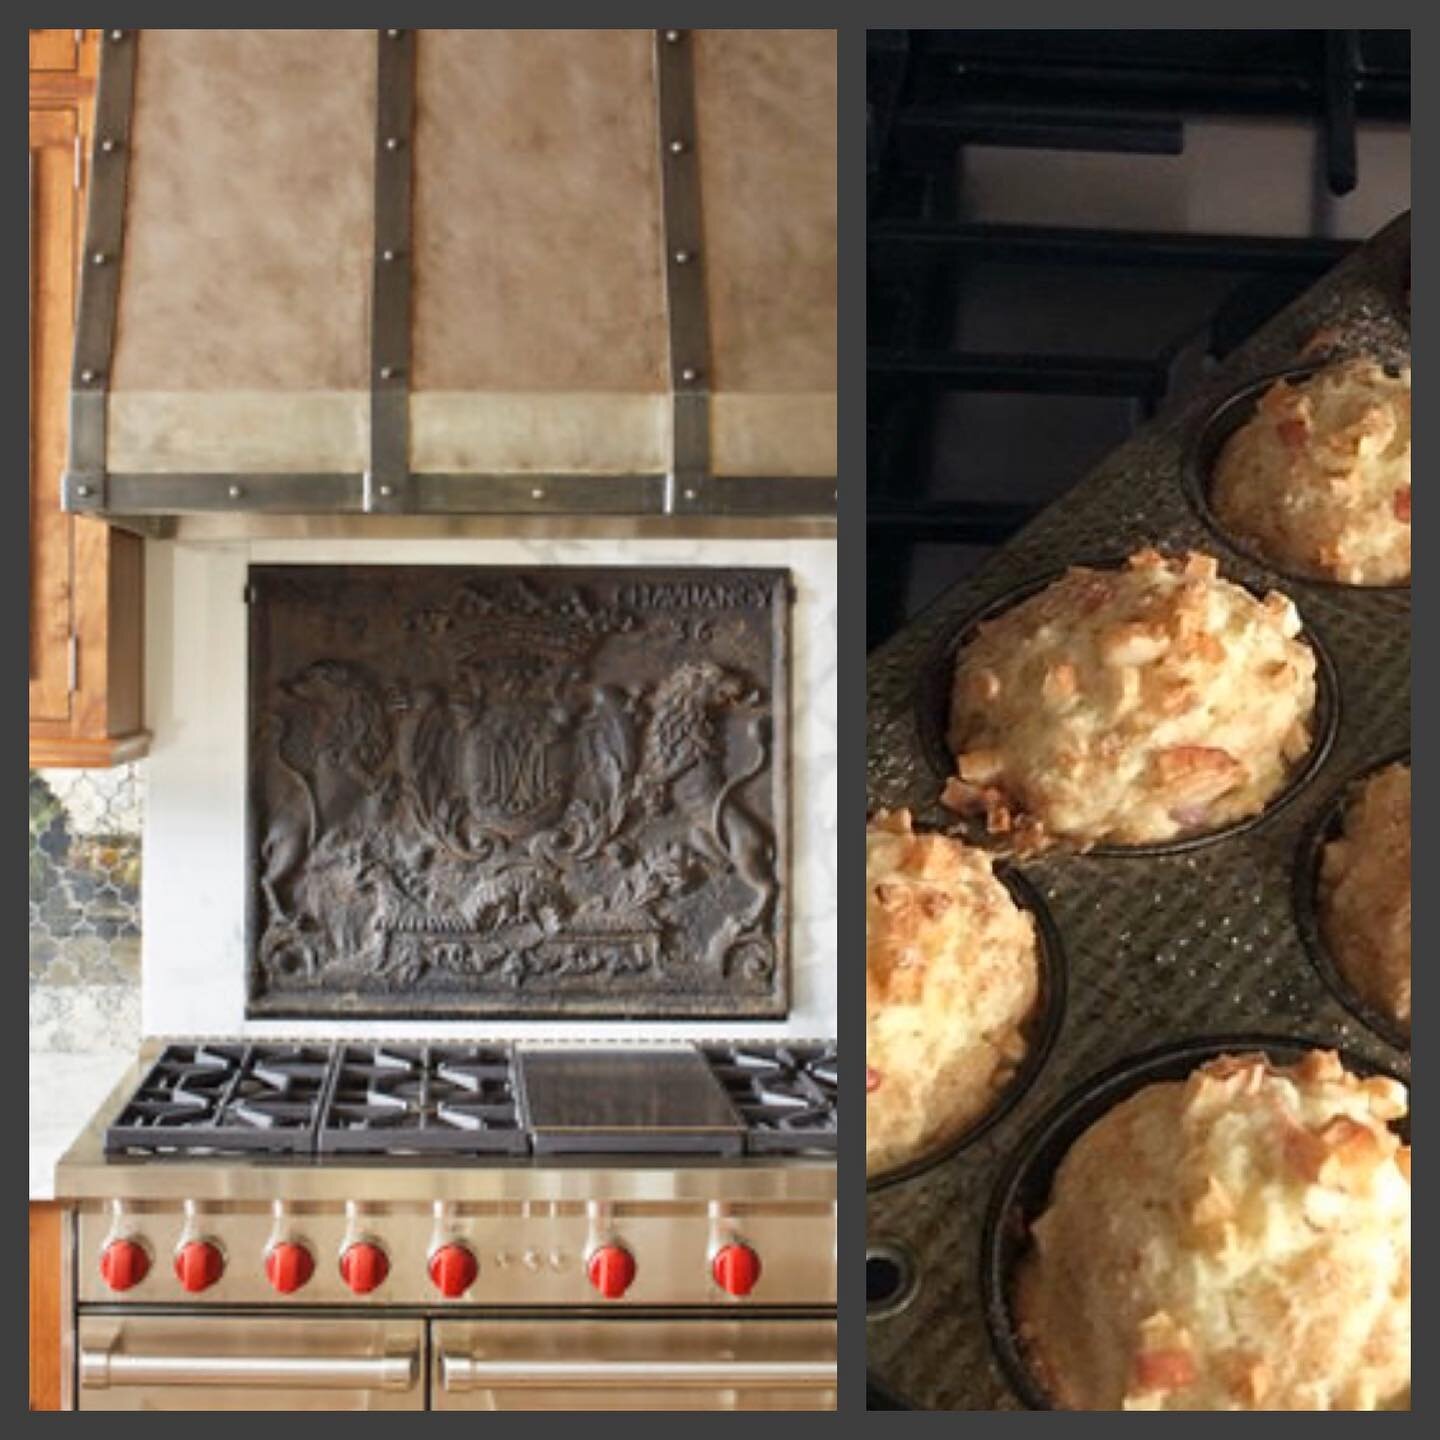 Because the texture of an early American muffin tin is as important as the patina of a 17th-century French backsplash. #everydetailmatters✨#spiritofplace 🍎muffins by @ejk361